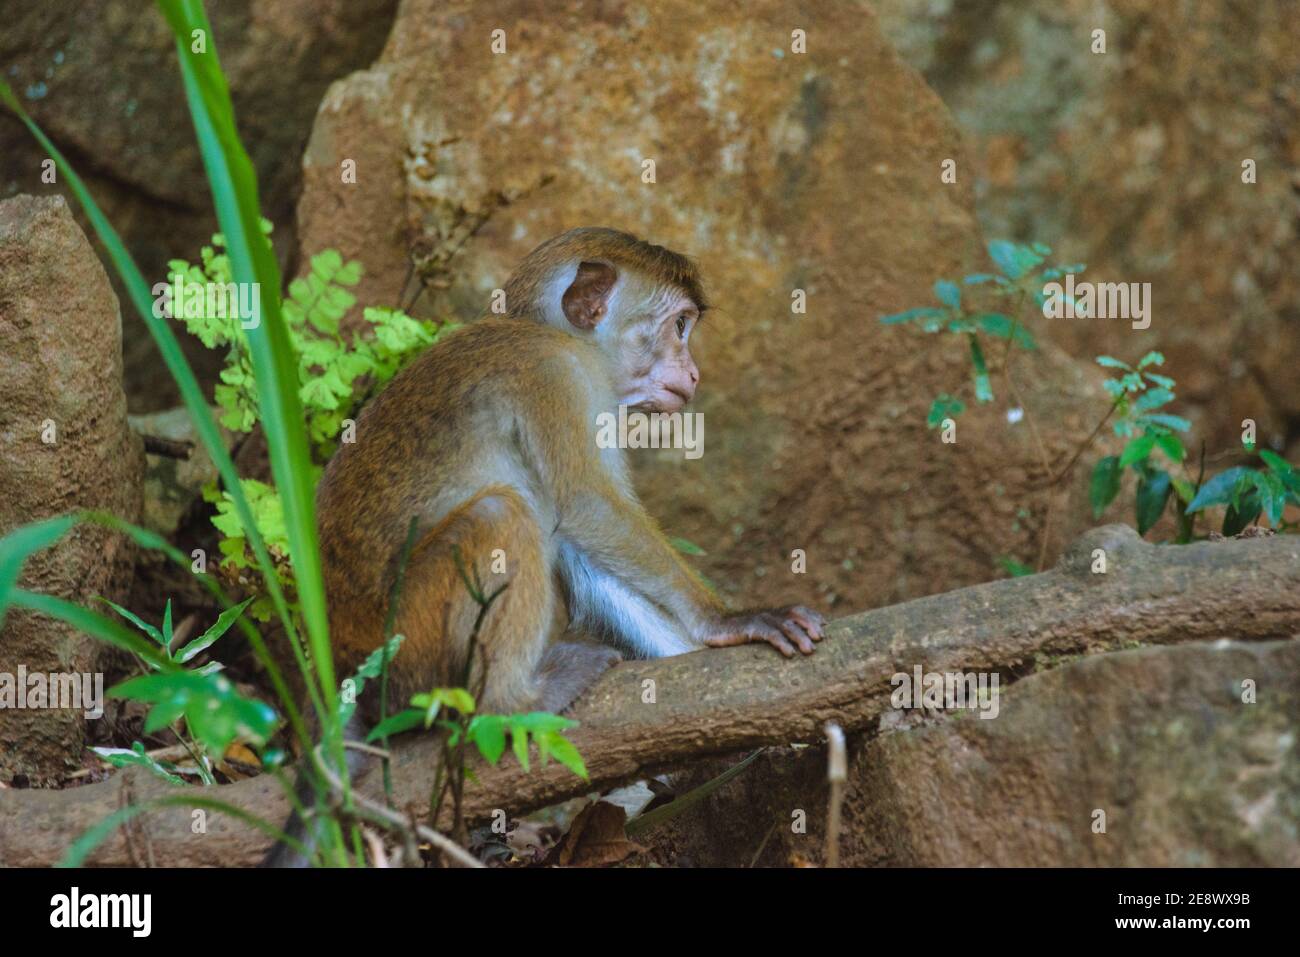 young Toque macaque, macaca sinica, ceylon monkey of Sri Lanka. Sitting in a tree in the rain forest Stock Photo